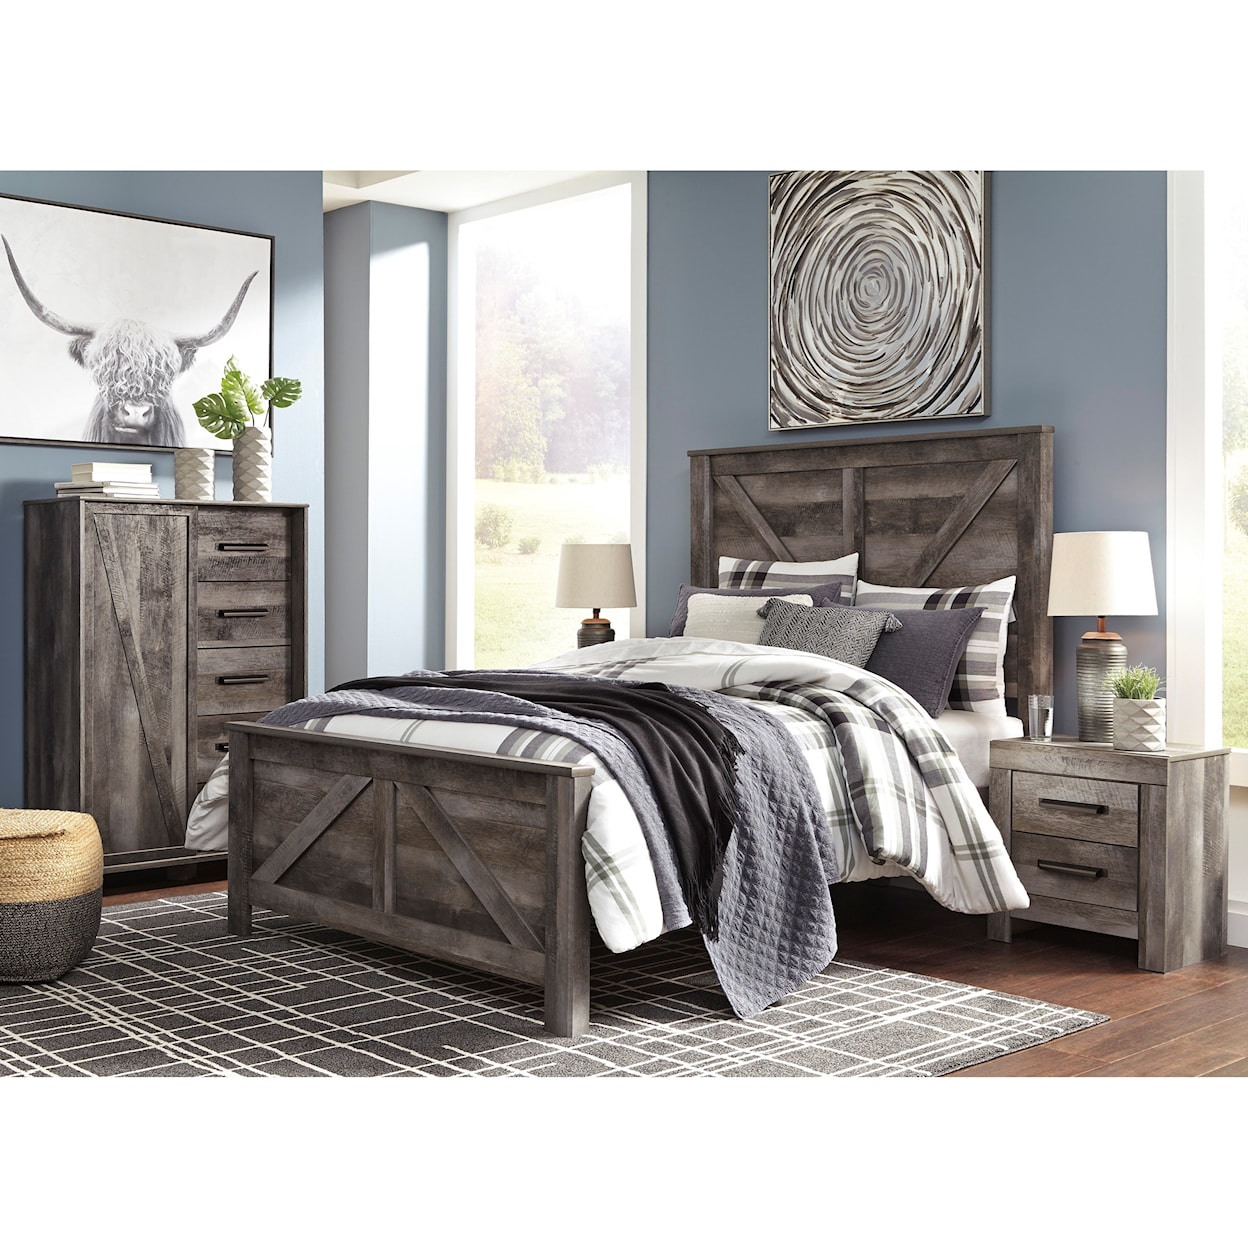 Signature Design by Ashley Furniture Wynnlow Queen Bedroom Group